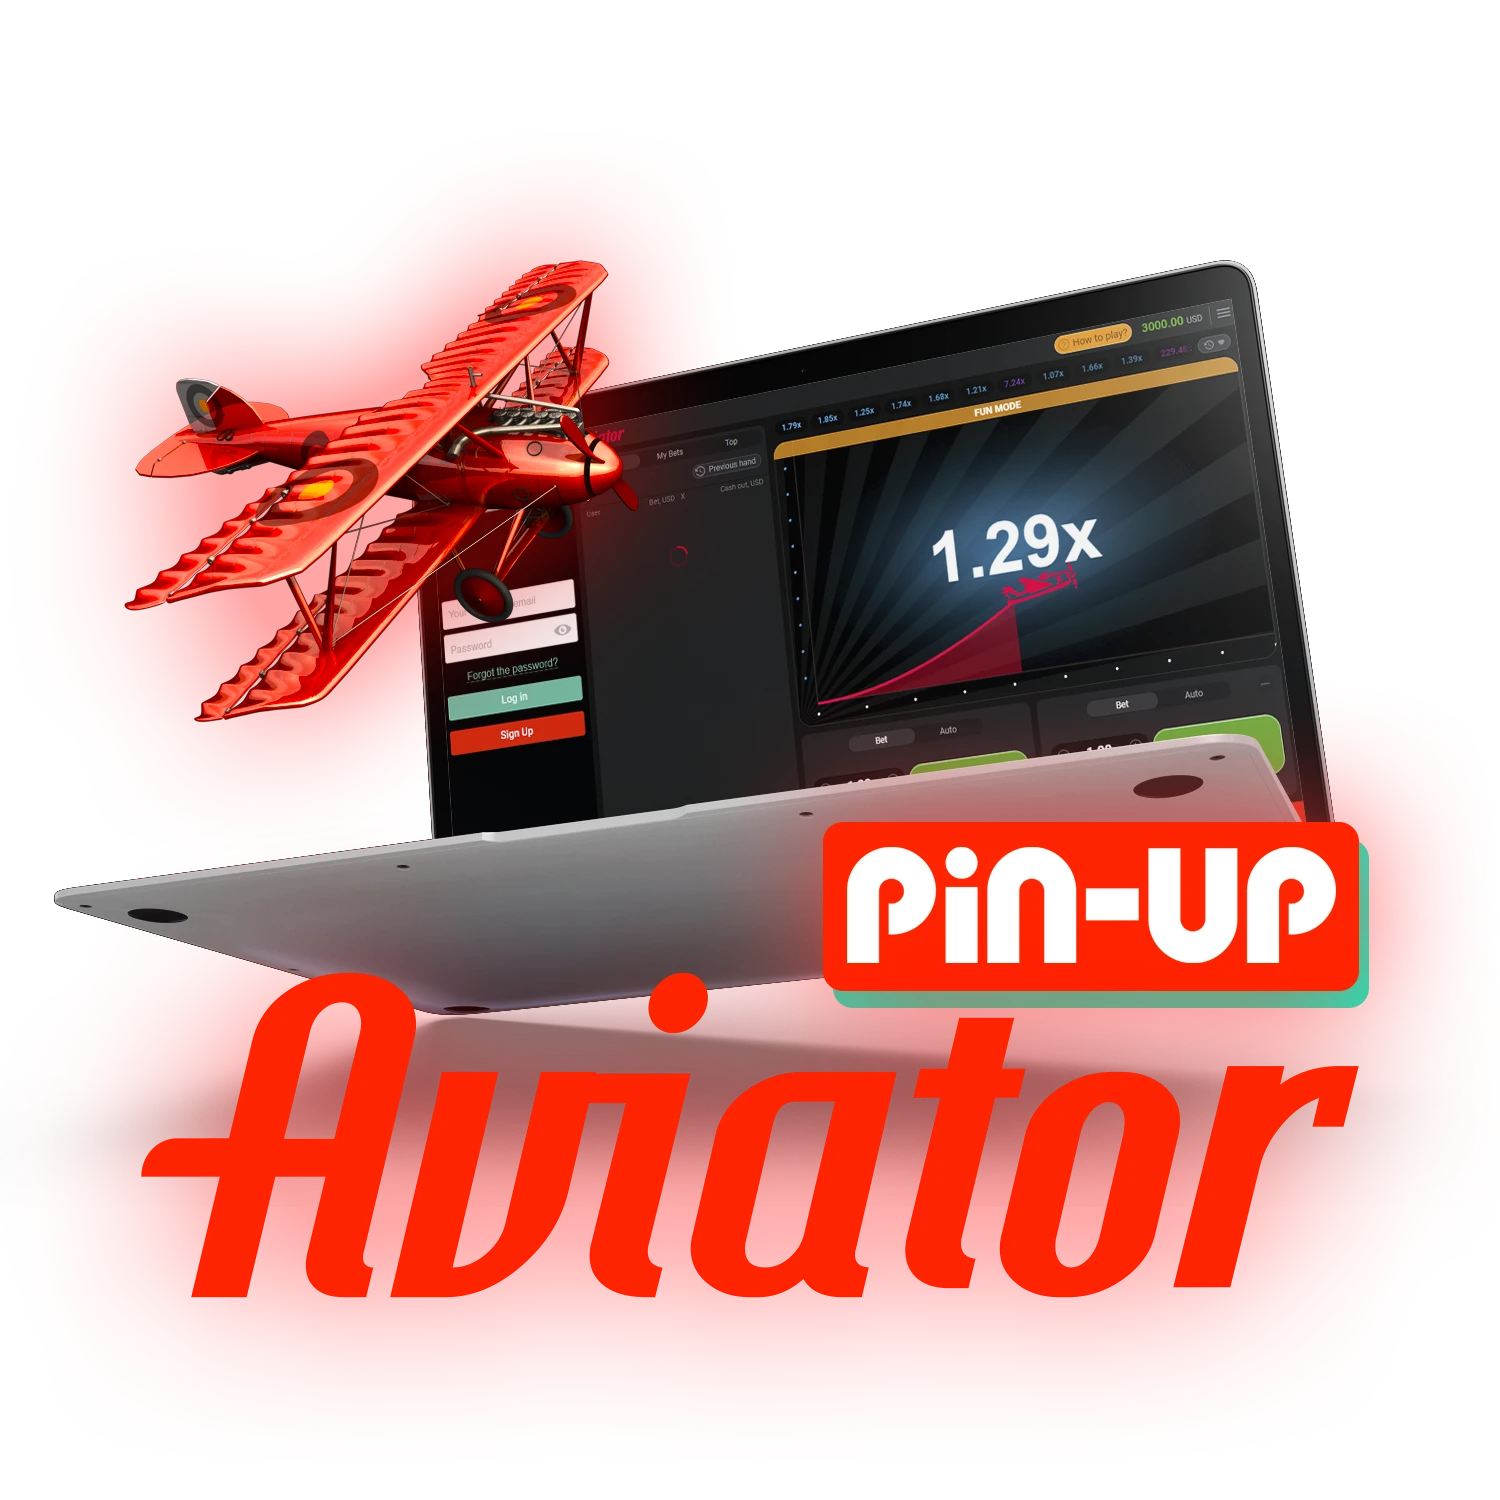 Learn how to play Aviator on Pin-Up.